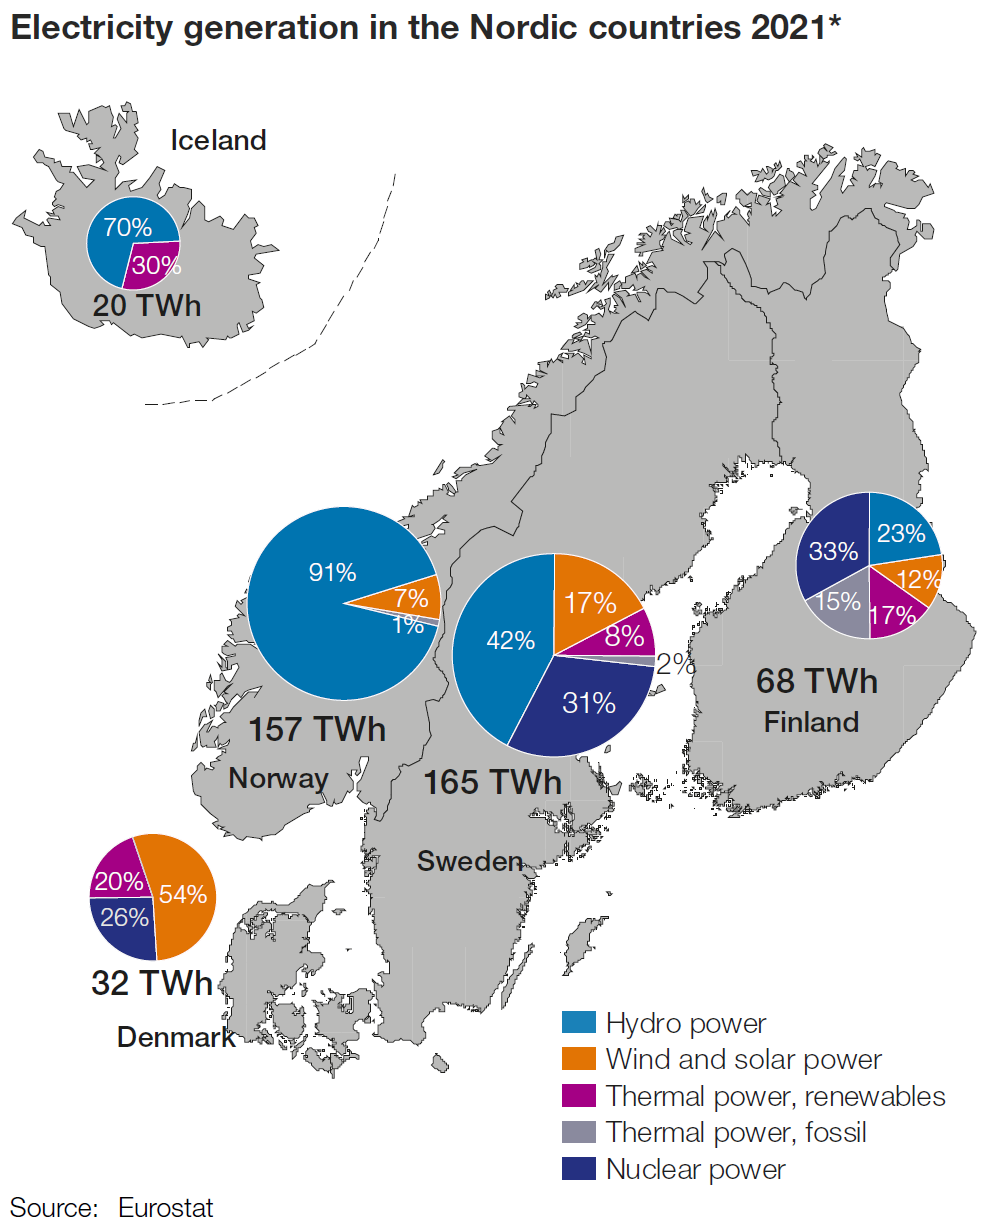 Electricity generation in the Nordic Countries 2021* Map. Electricity generation in Finland was 68 TWh in 2021*. The shares were: Nuclear power 33%, hydro power 23%, thermal power (fossil) 15%, thermal power (renewables) 17%, wind and solar power 12%. Electricity generation in Sweden was 165 TWh. The shares were: Hydro power 42%, nuclear power 31%, wind and solar power 17%, thermal power (renewables) 8%, thermal power (fossil) 2%. Electricity generation in Norway was 157 TWh. The shares were: Hydro power 91%, wind and solar power 7%, thermal power (fossil) 1%. Electricity generation in Denmark was 32 TWh. The shares were: Wind and solar power 54%, thermal power (fossil) 26%, thermal power (renewables) 20%. Electricity generation in Iceland was 20 TWh. The shares were: Hydro power 70%, thermal power (renewables) 30%. Source: Eurostat.